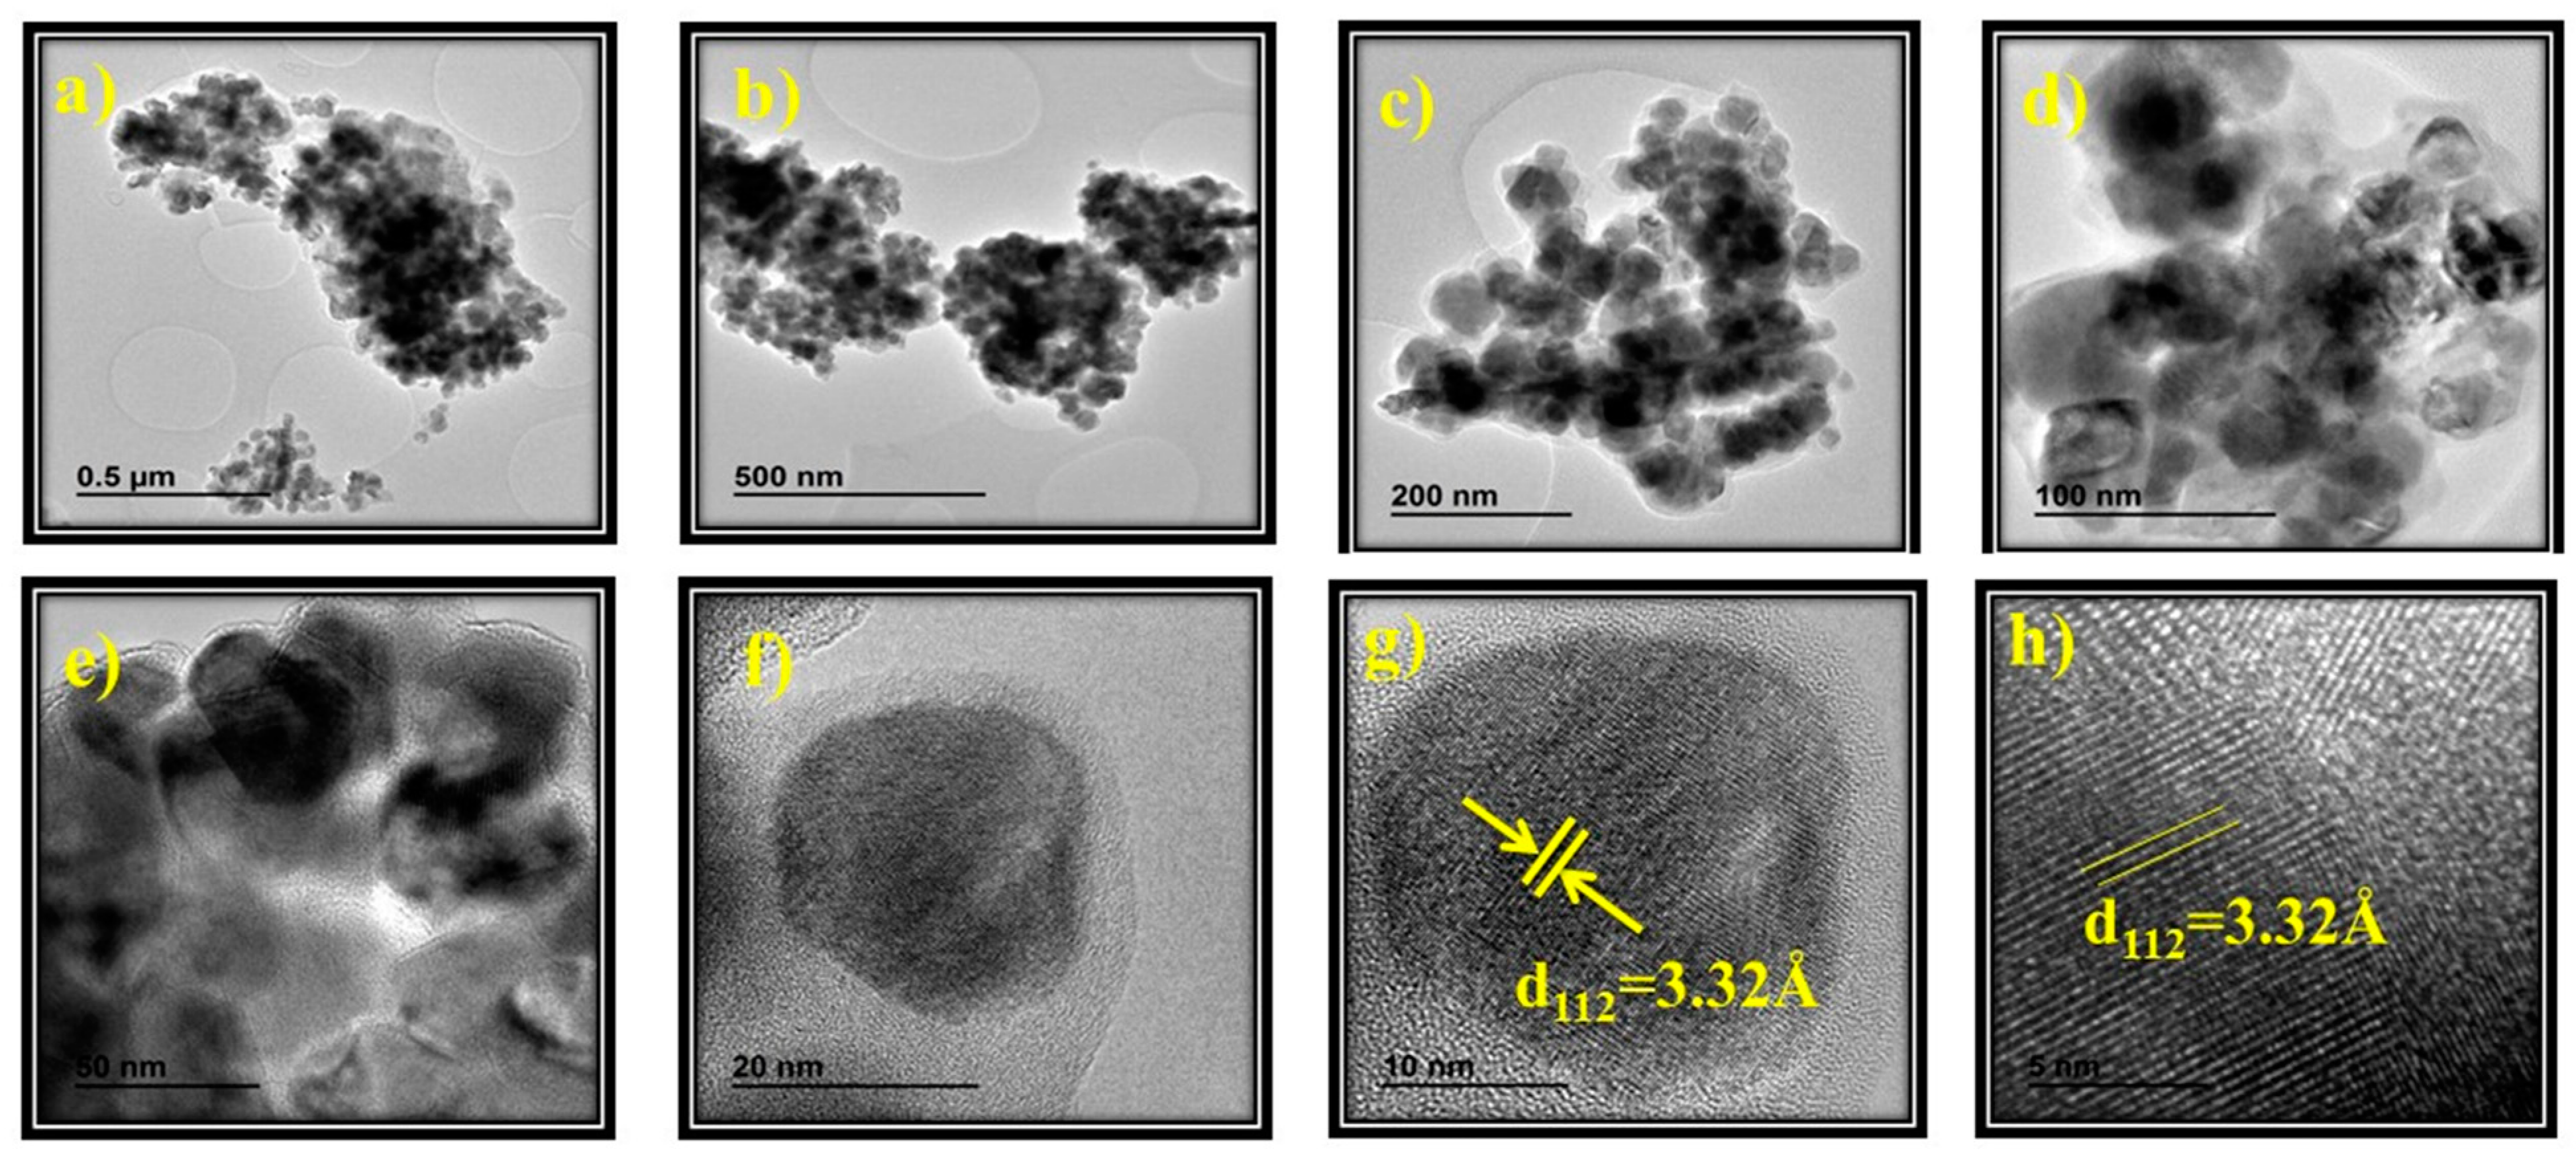 Nanomaterials Free Full Text Structural And Electrochemical Analysis Of Cigs Cr Crystalline Nanopowders And Thin Films Deposited Onto Ito Substrates Html